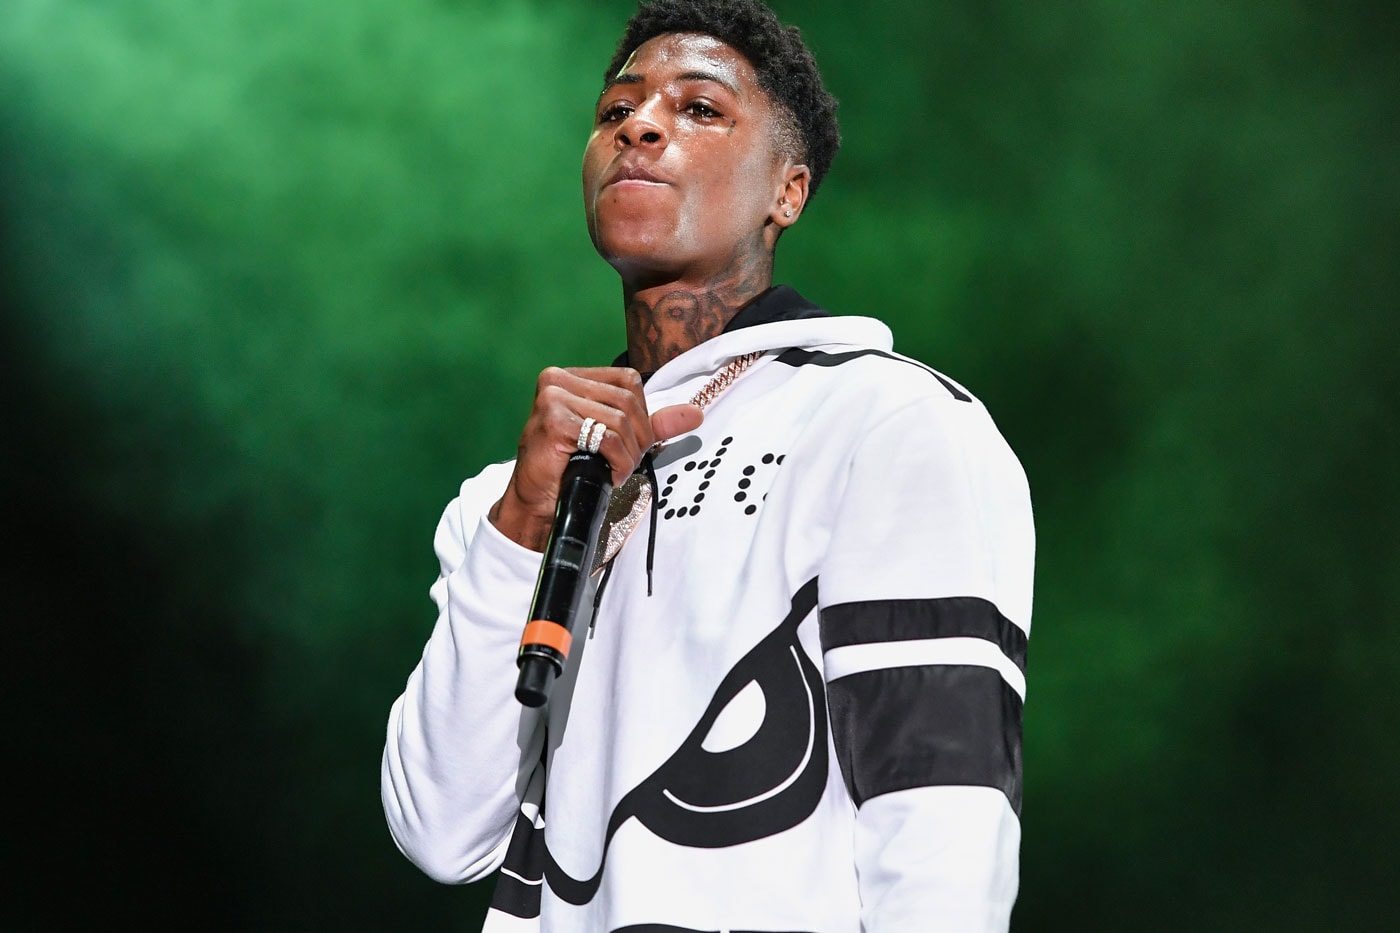 YoungBoy Never Broke Again Young Thug Quando Rondo 4Loyalty EP stream spotify september 2018 new apple music